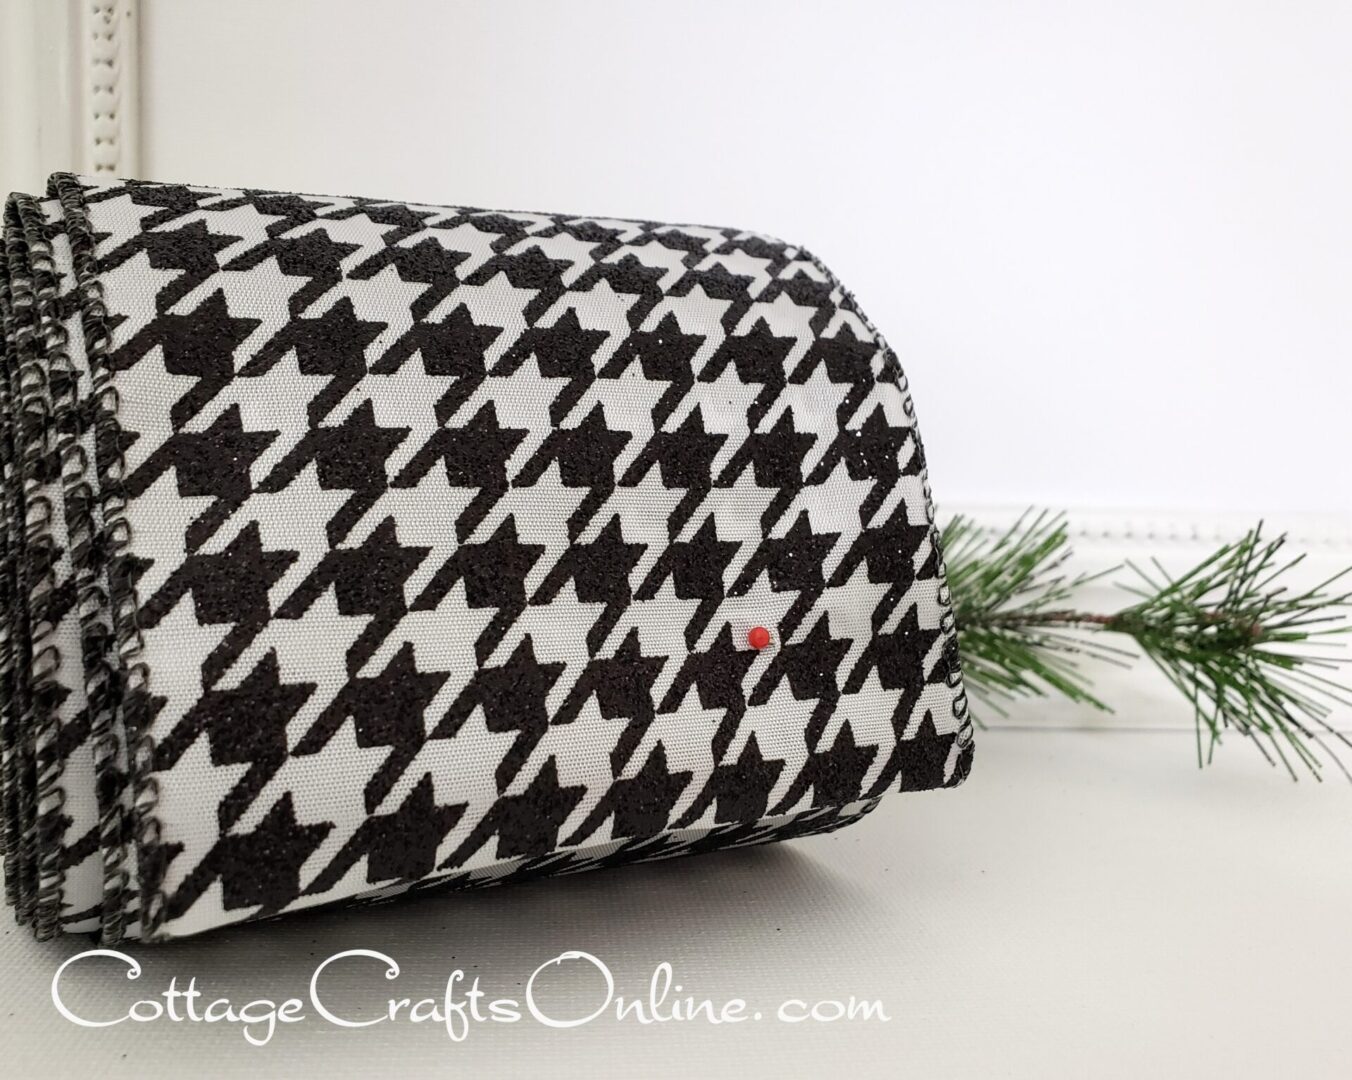 a black and white houndstooth purse on a table.